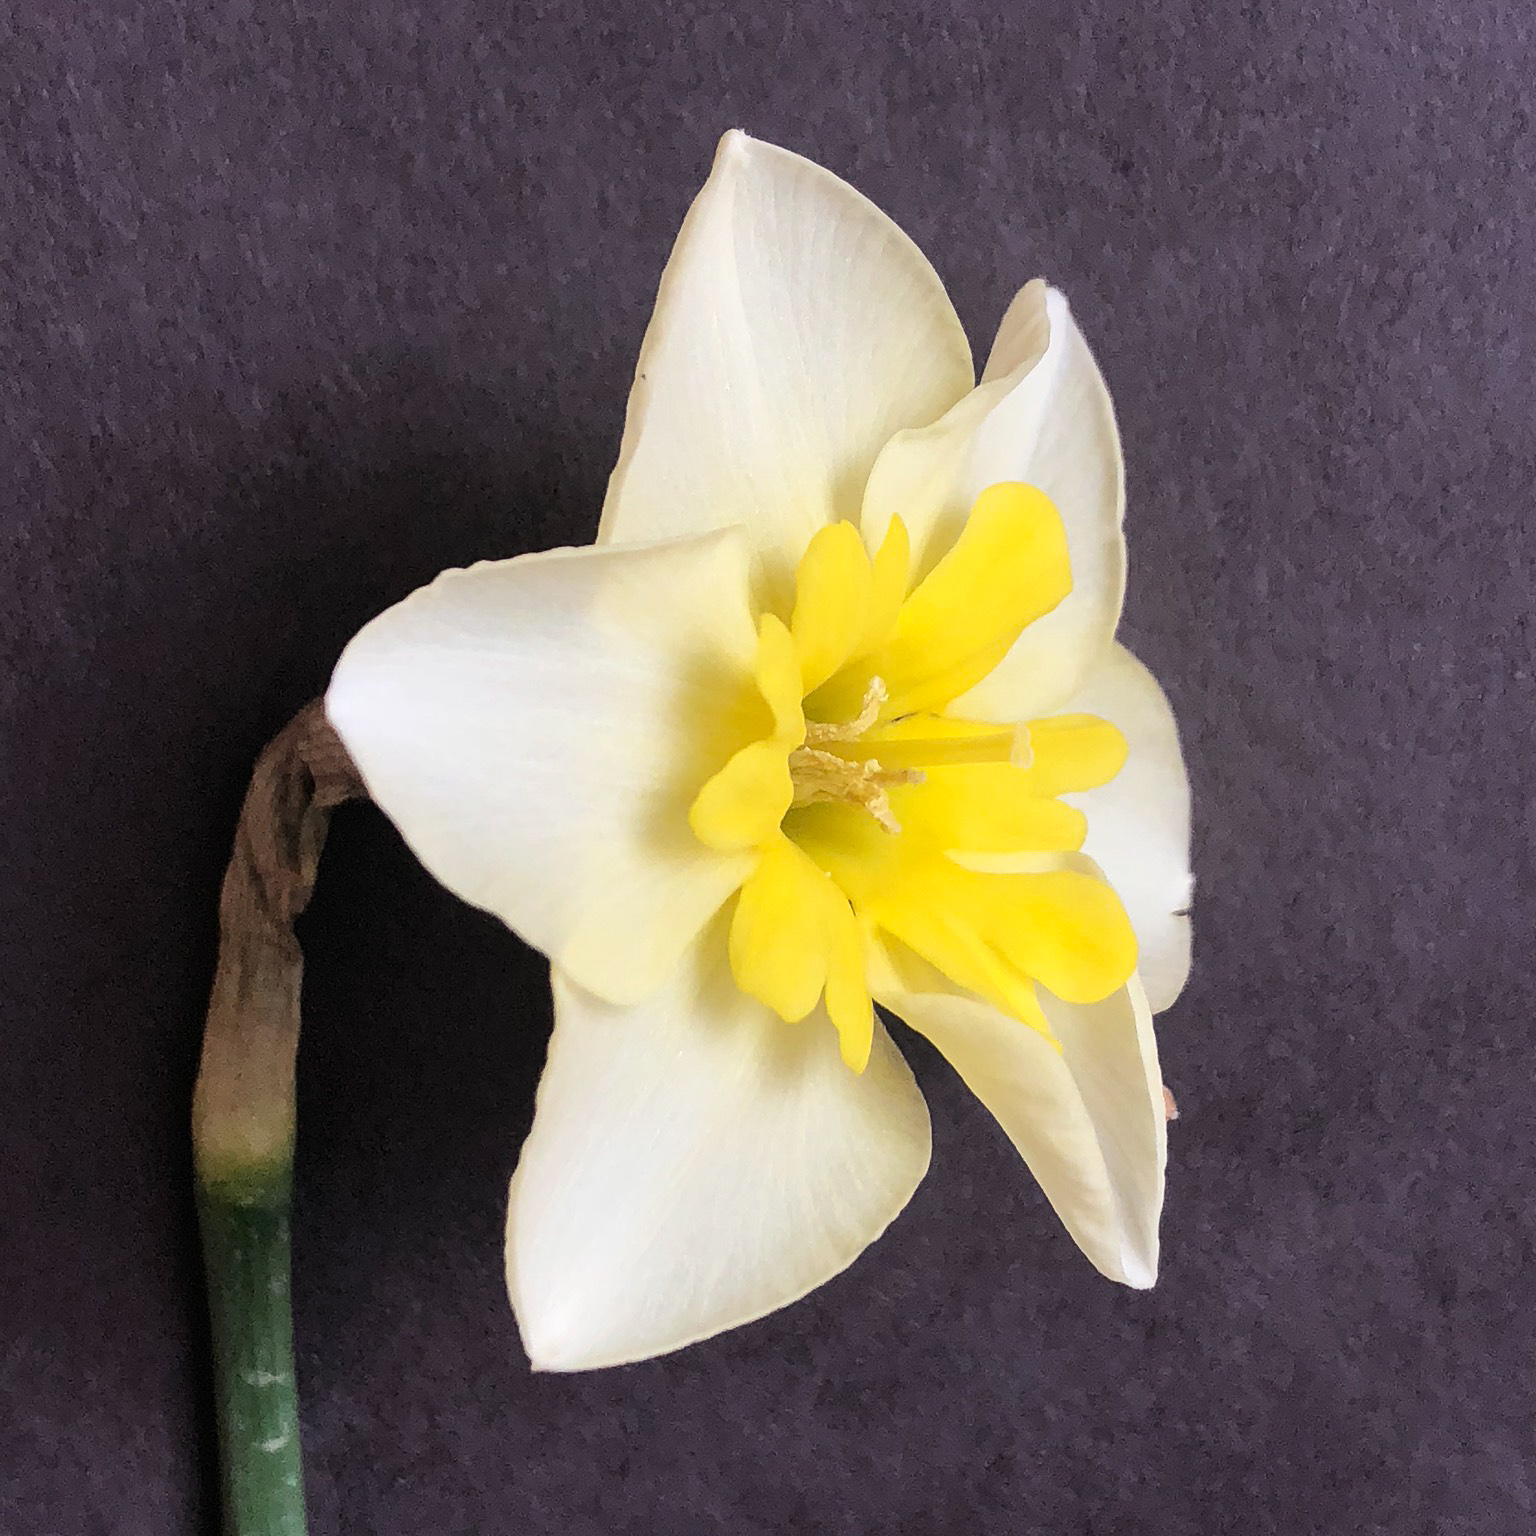 three quarter view of narcissus smiling twin